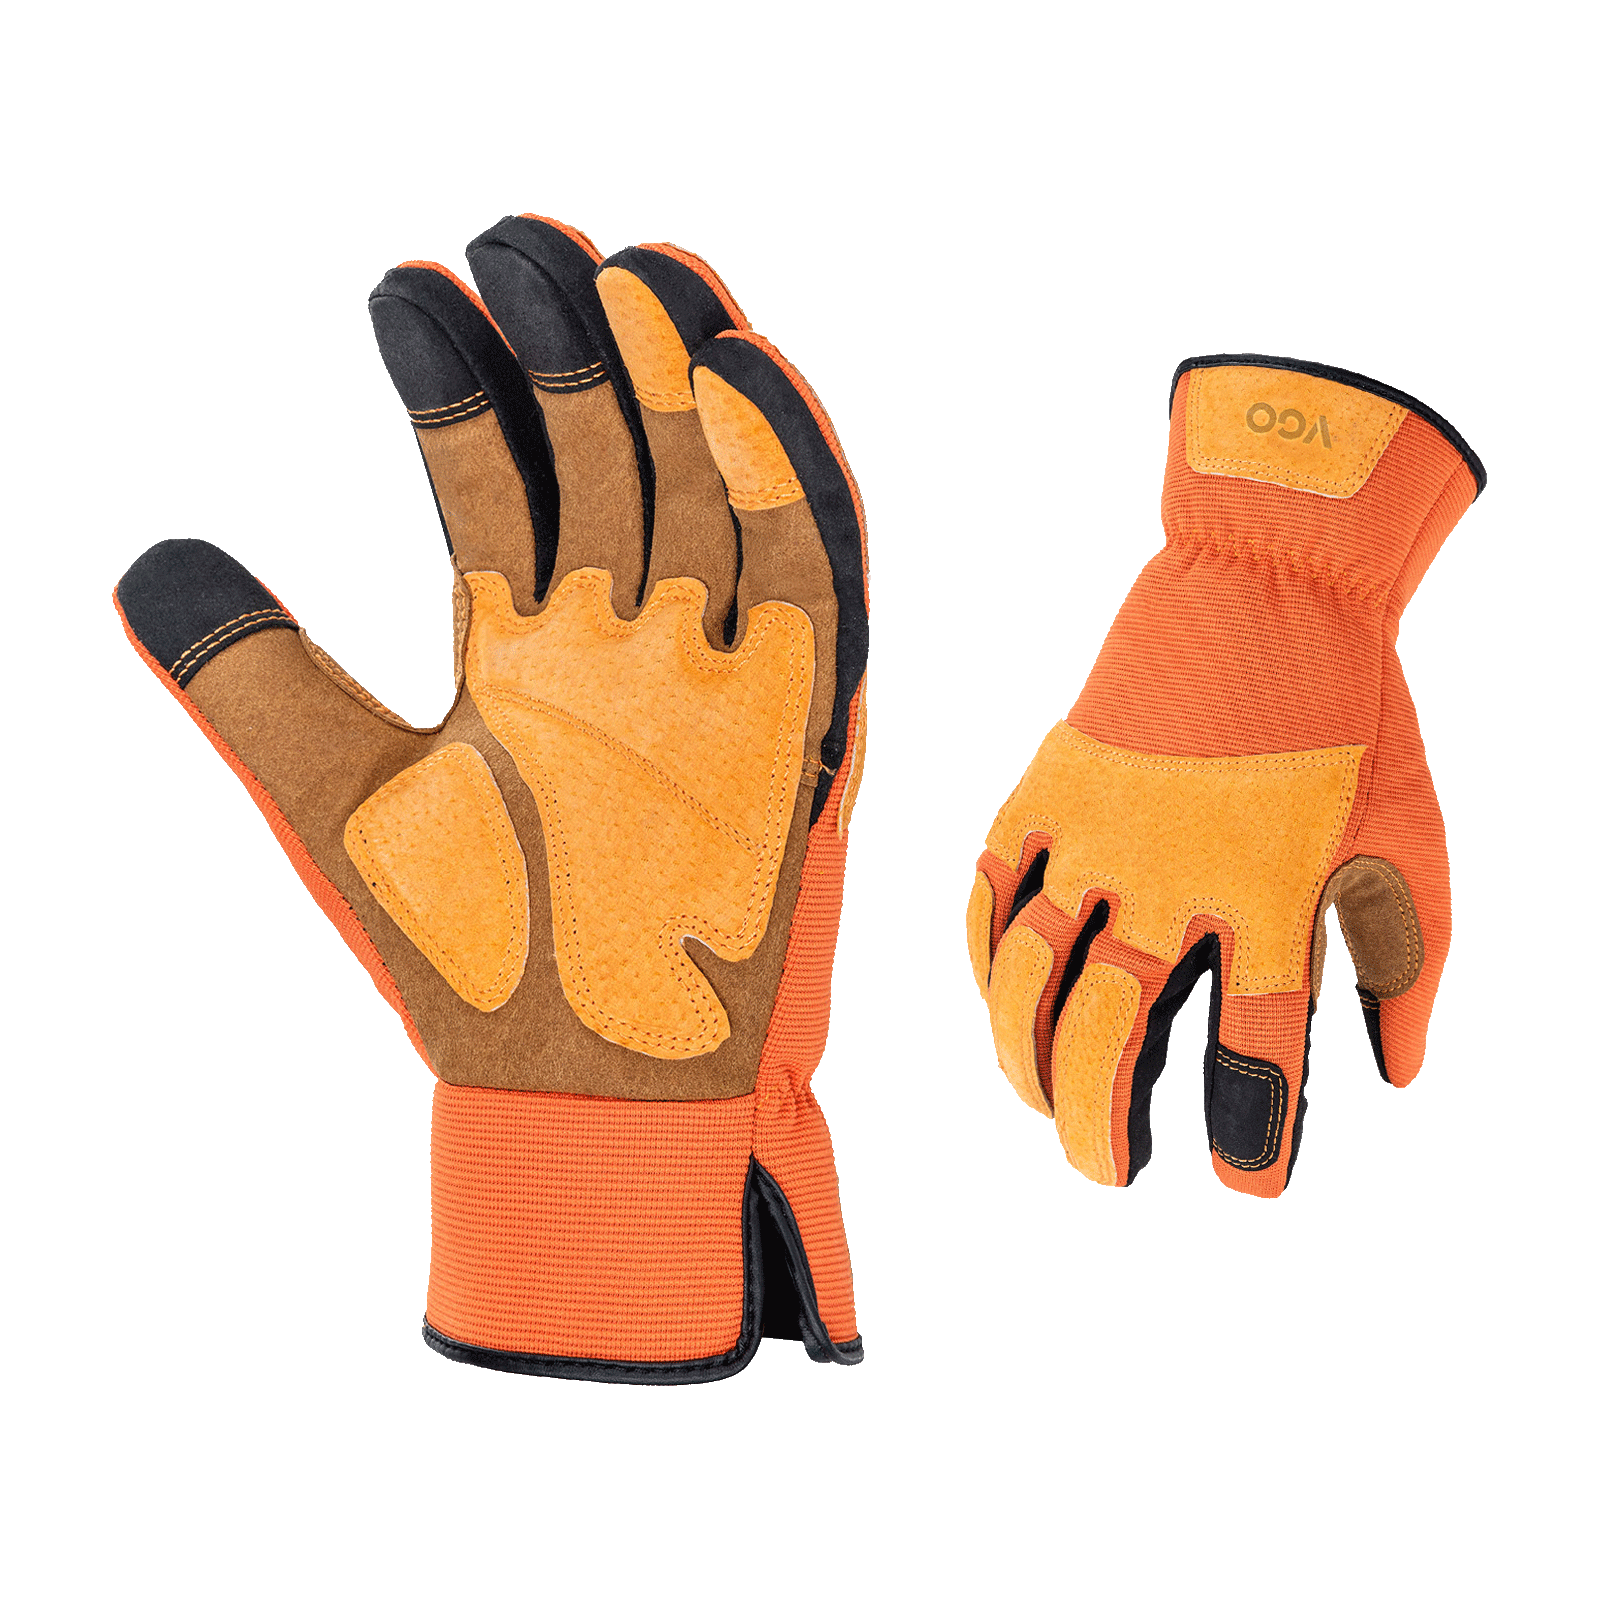 Mechanics Work Gloves Safety Heavy Duty Protection Gardening Construction  SALE